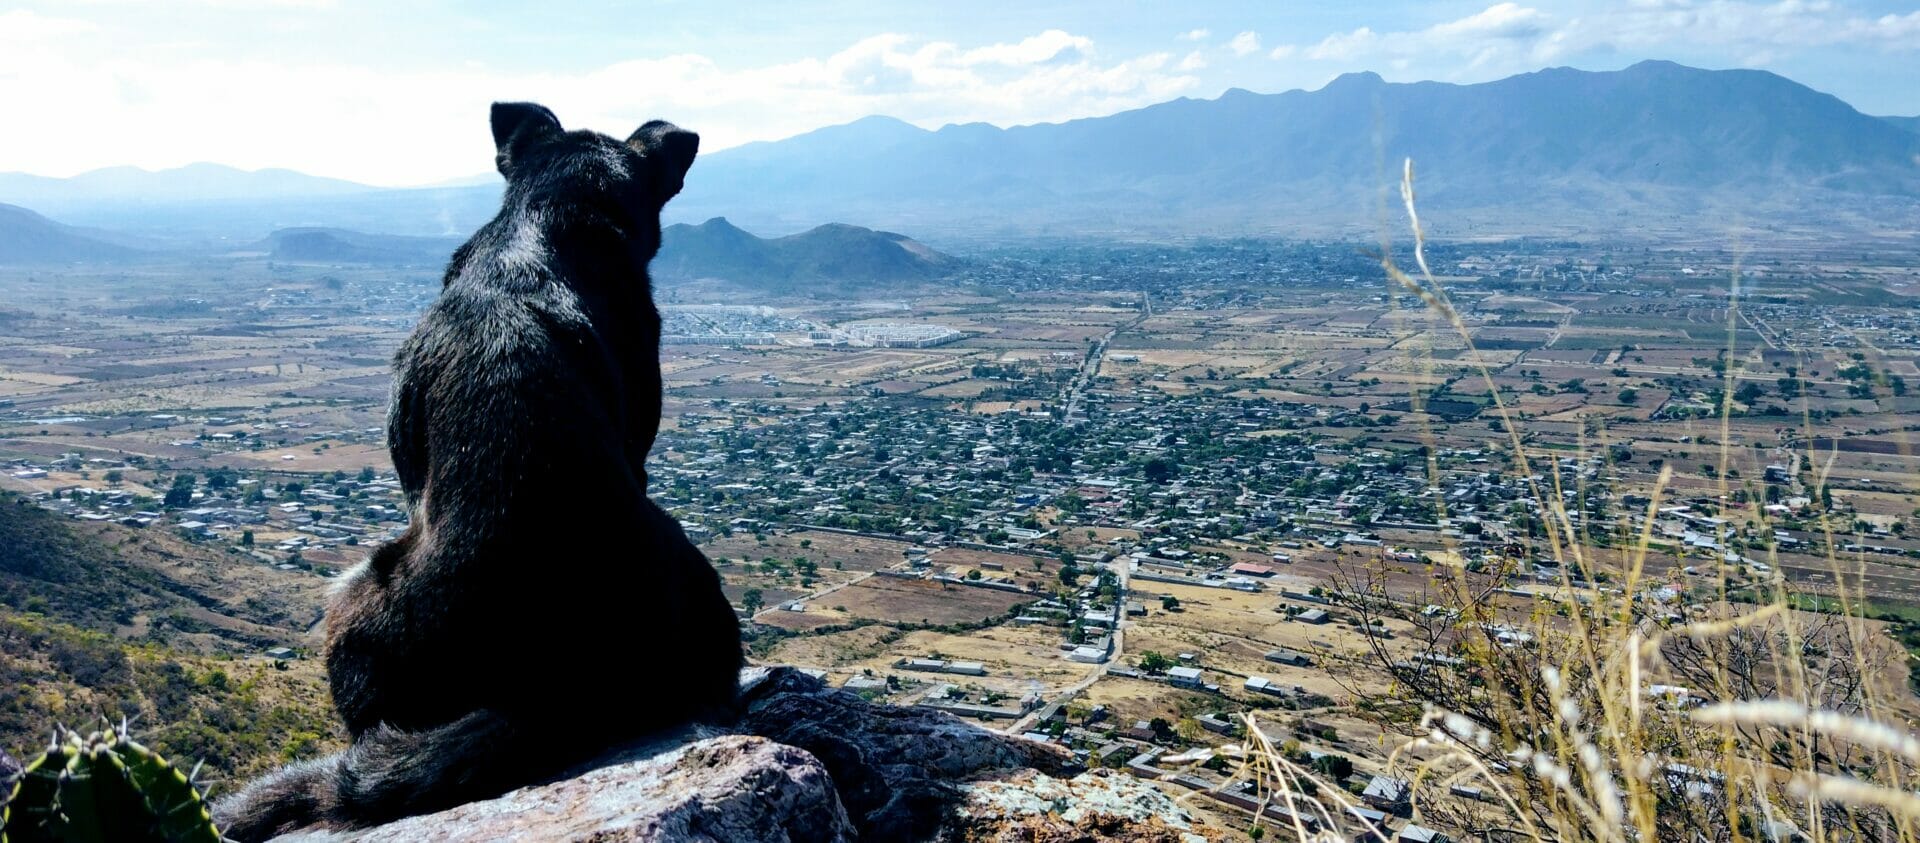 A black dog looks out over the Oaxaca Valley